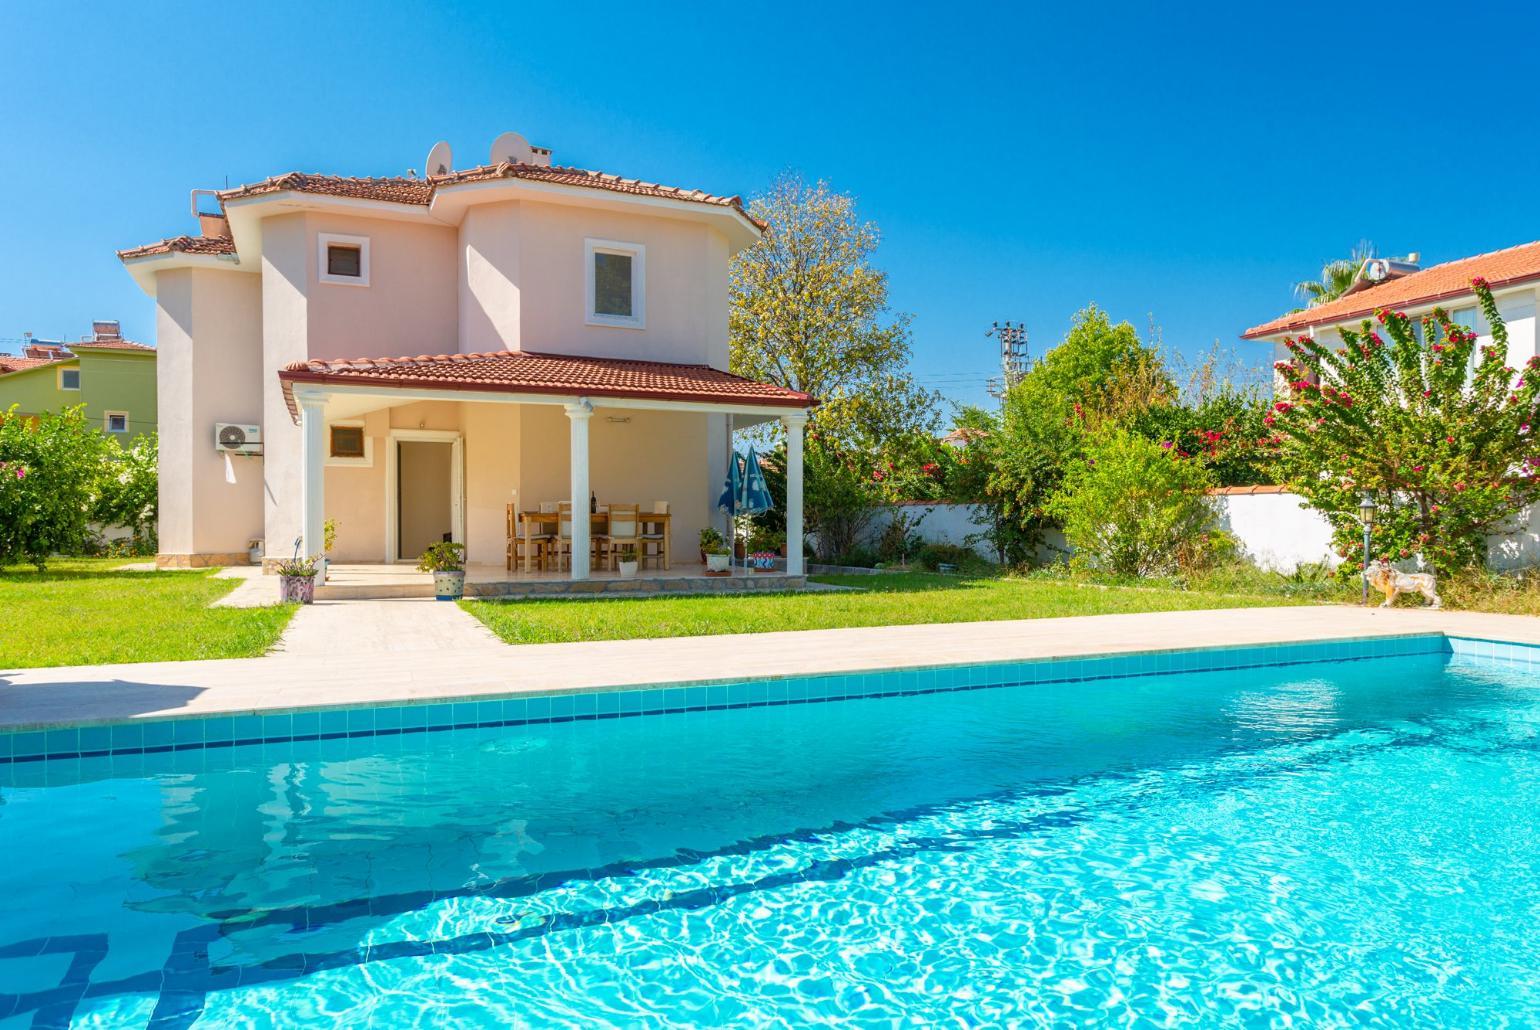 Beautiful villa with private pool, terrace, and garden